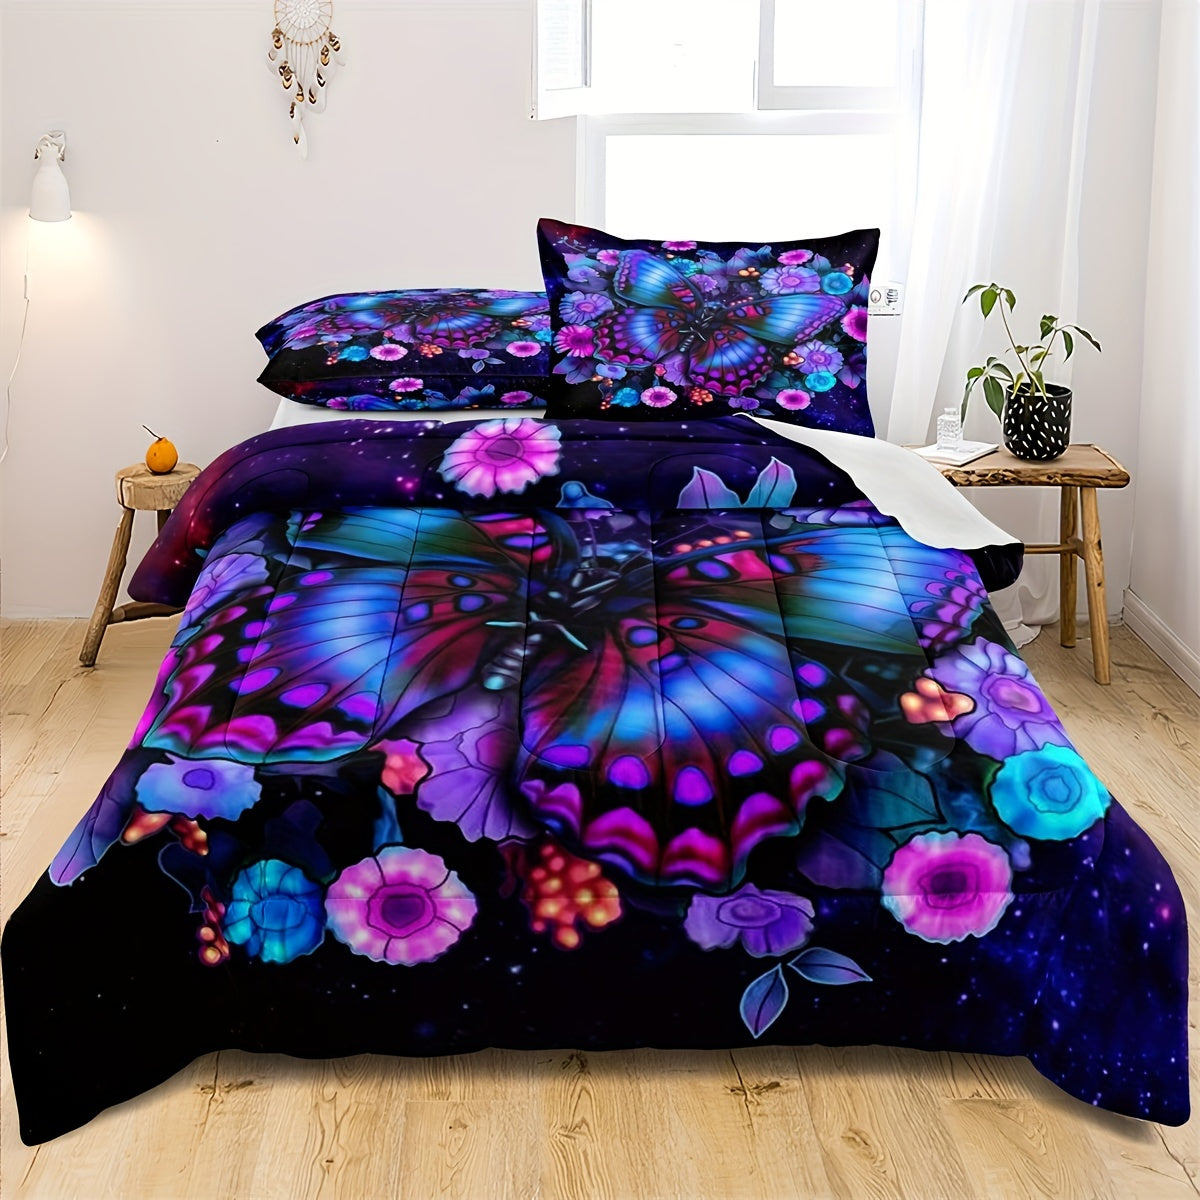 2/3pcs Butterfly Bedding Comforter Set Starry Sky Bedding Butterfly Floral Printed Pattern Quilt Bedding Set For Girls Bedroom All Season With Comforter And Pillowcases Purple Butterfly Comforter (1*Comforter + 1/2*Pillowcase, Without Core)